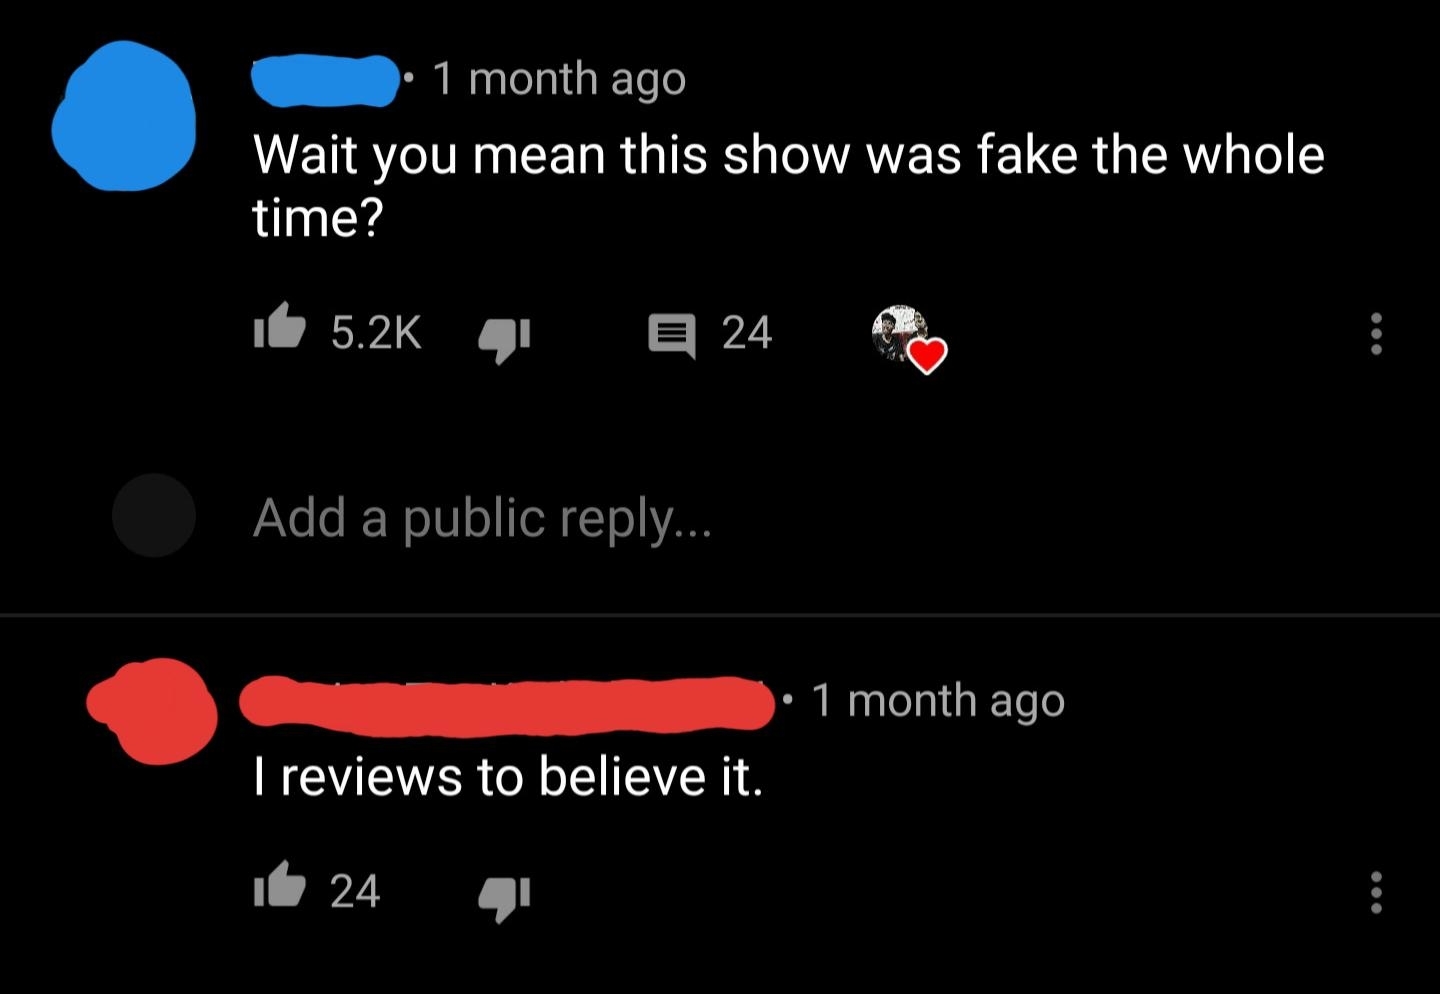 Two YouTube comments: &quot;Wait, you mean this show was fake the whole time?&quot; response: &quot;I reviews to believe it&quot;